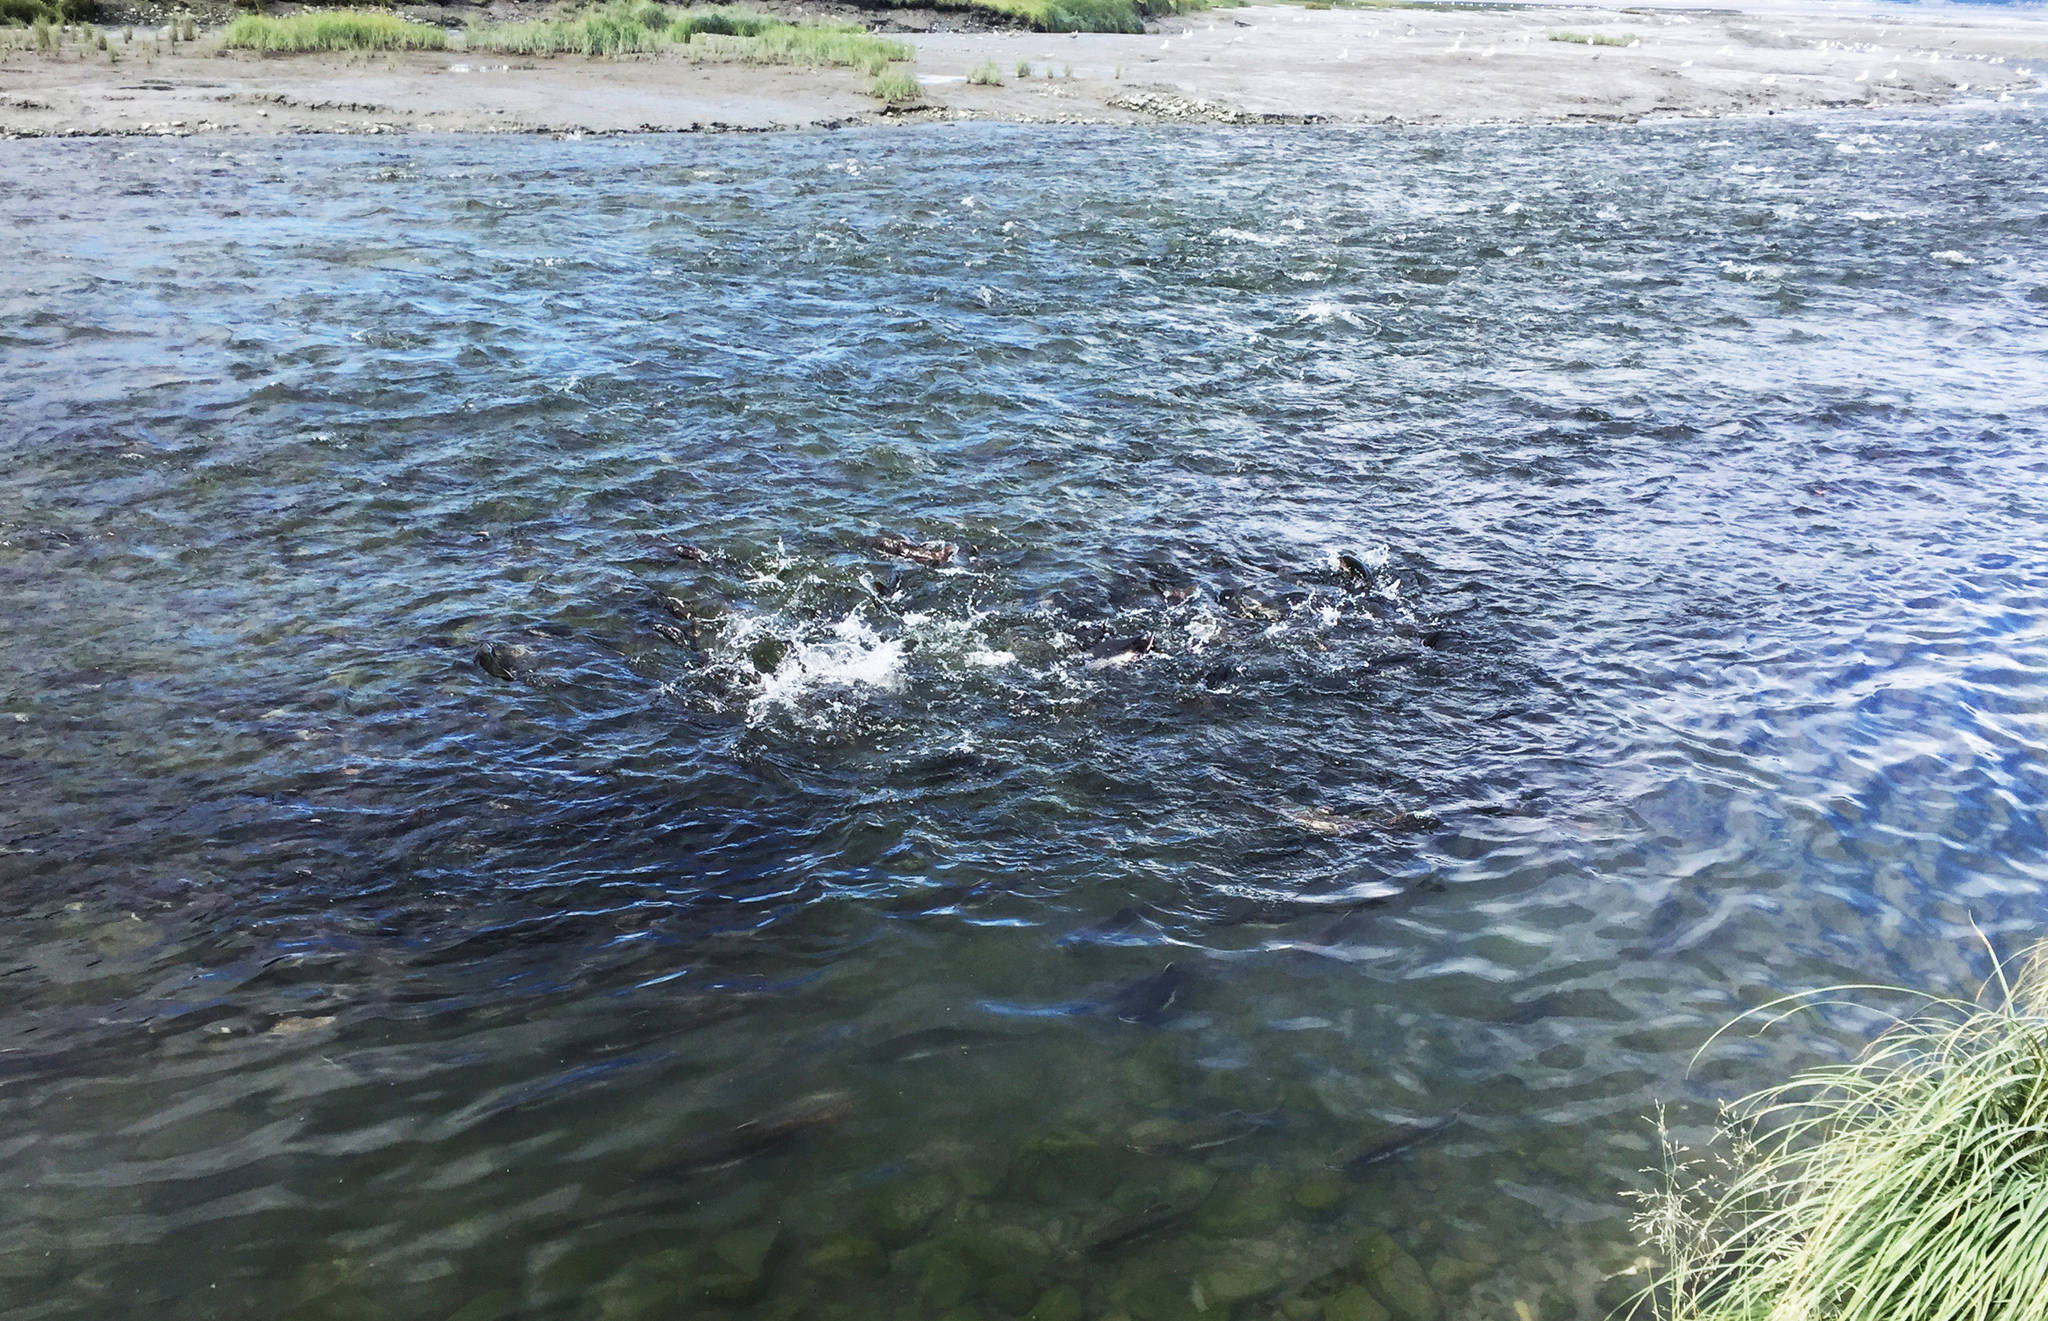 A school of pink salmon splashes in the shallows of Resurrection Creek near its confluence with Cook Inlet on Sunday, Aug. 13, 2017 in Hope, Alaska. Pink salmon can return to the river in large numbers in the late summer and early fall. (Photo by Elizabeth Earl/Peninsula Clarion)